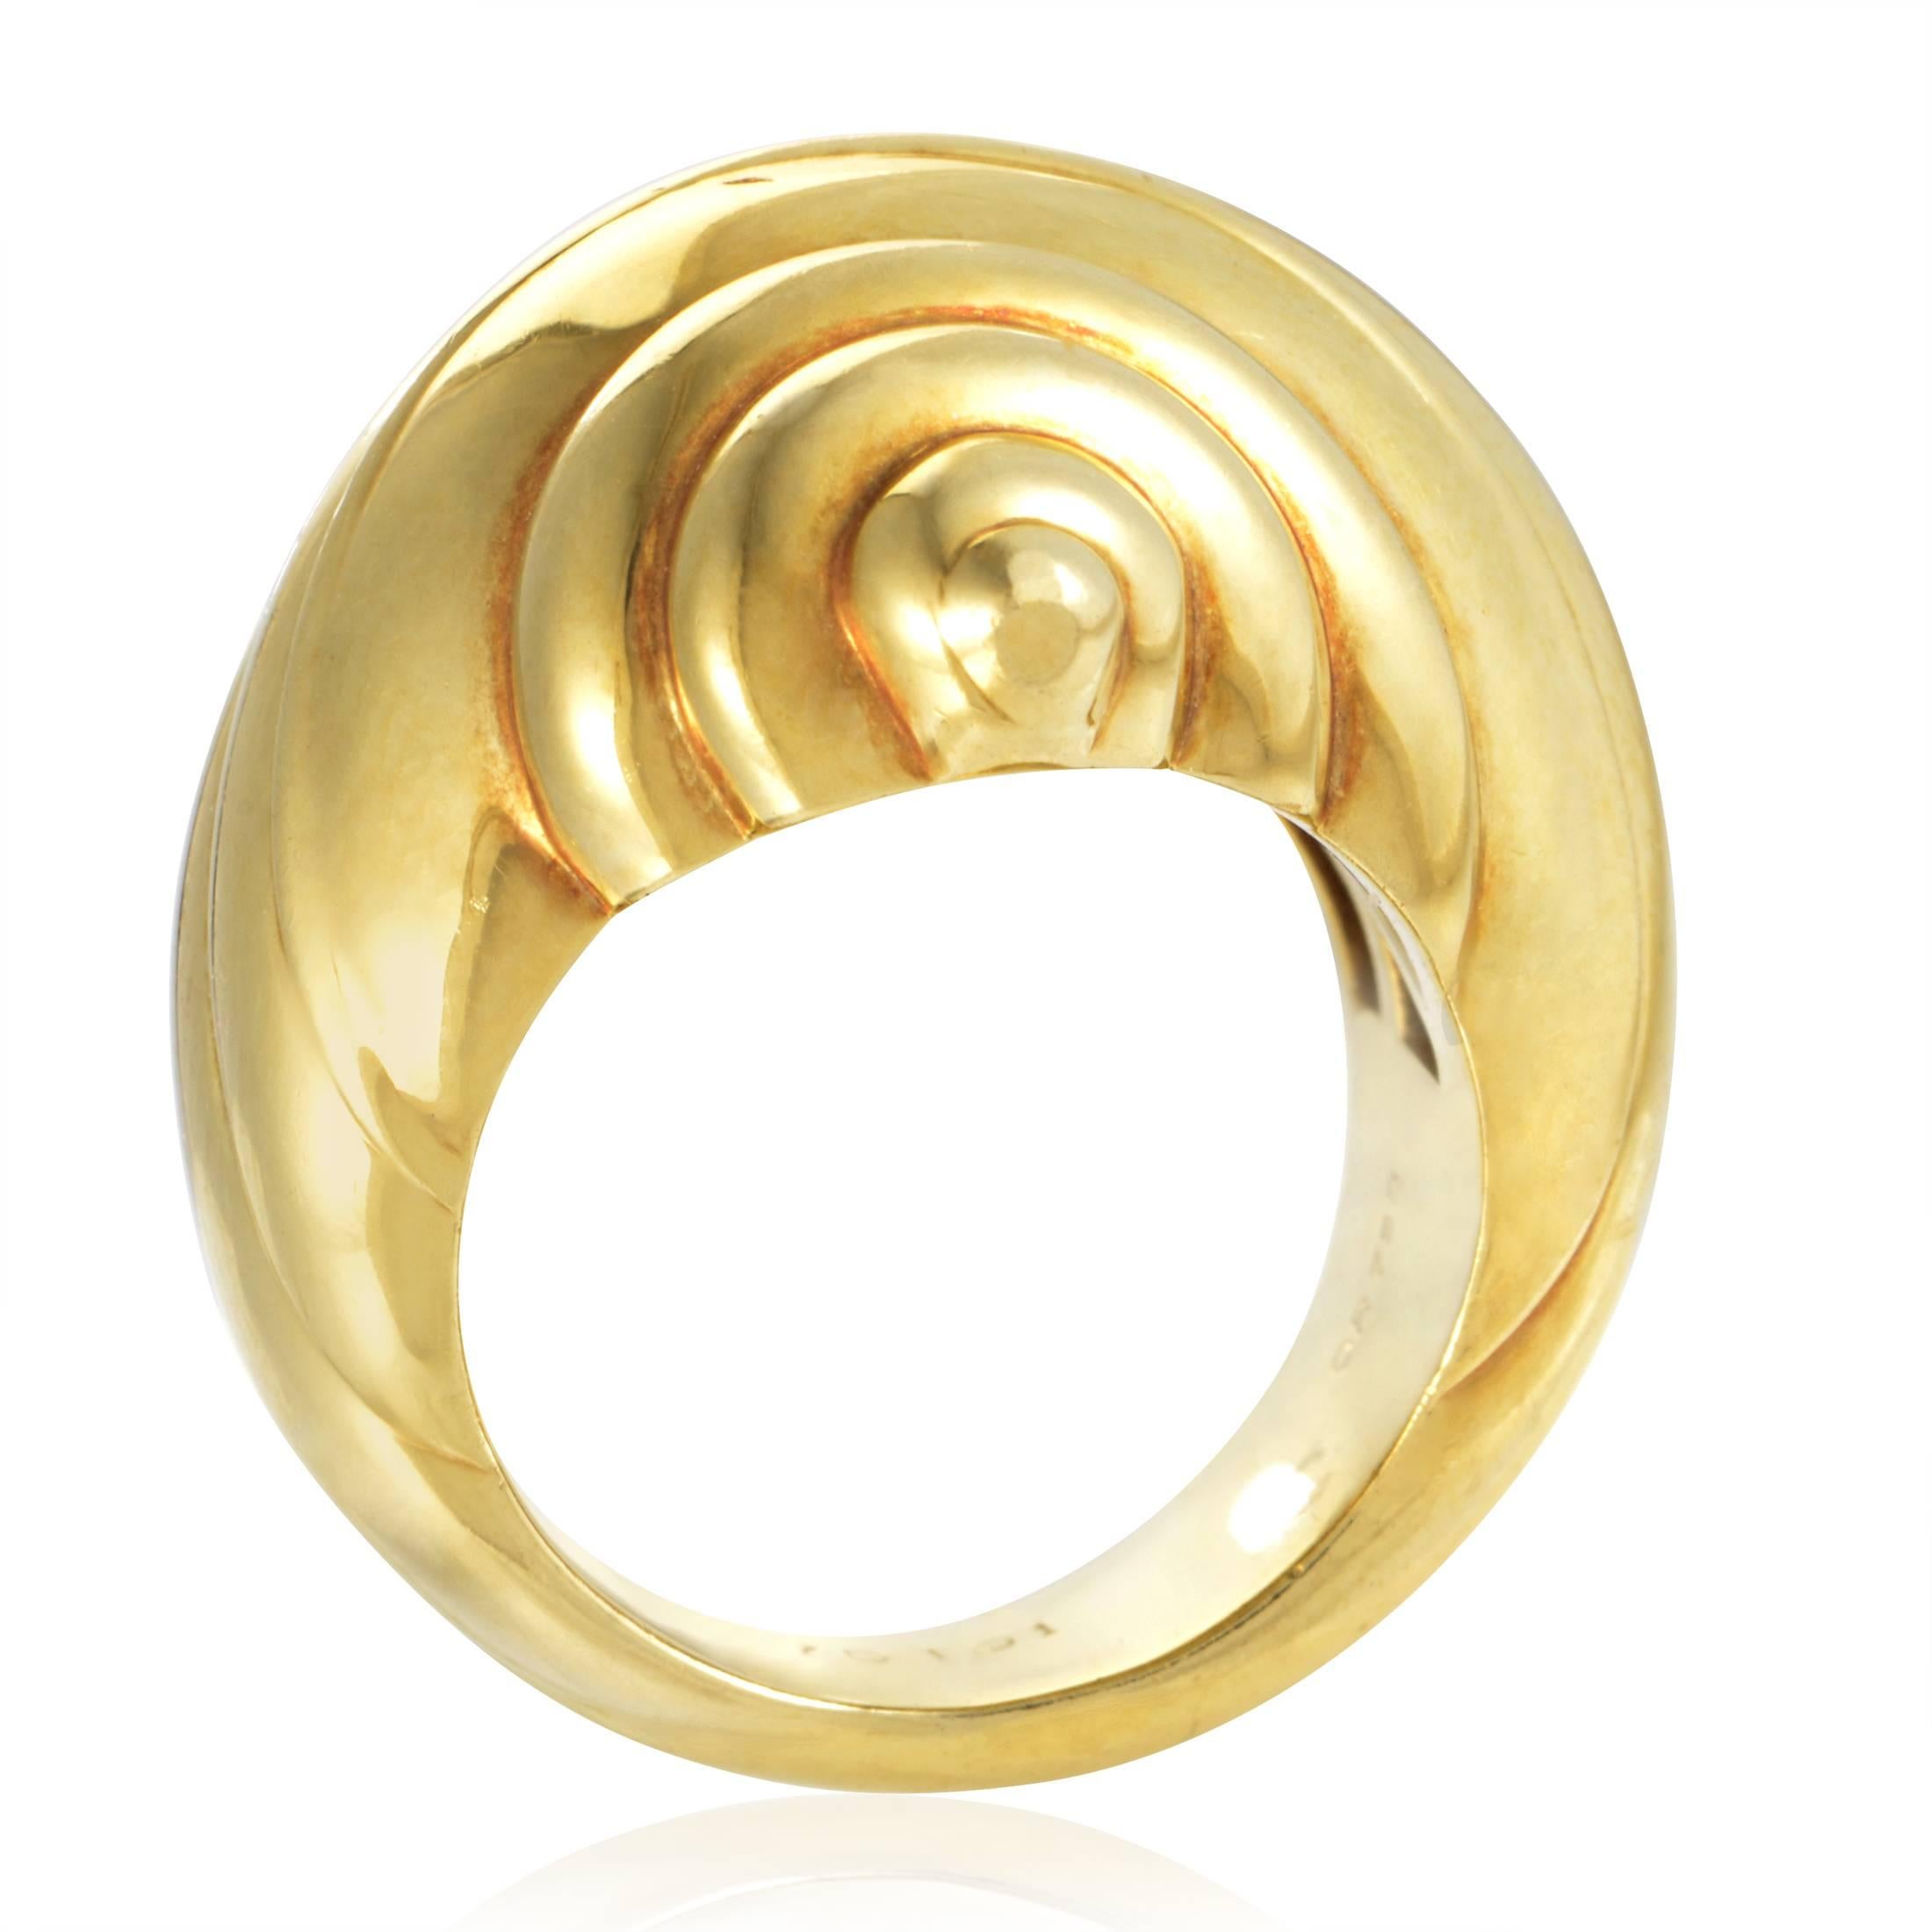 Assuming the wonderfully intriguing form of a shell that allows the impeccably polished 18K yellow gold to produce stunning play of light, this exceptional ring from Chanel exudes elegant simplicity and adorable spirit.
Ring Size: 5.25 (49